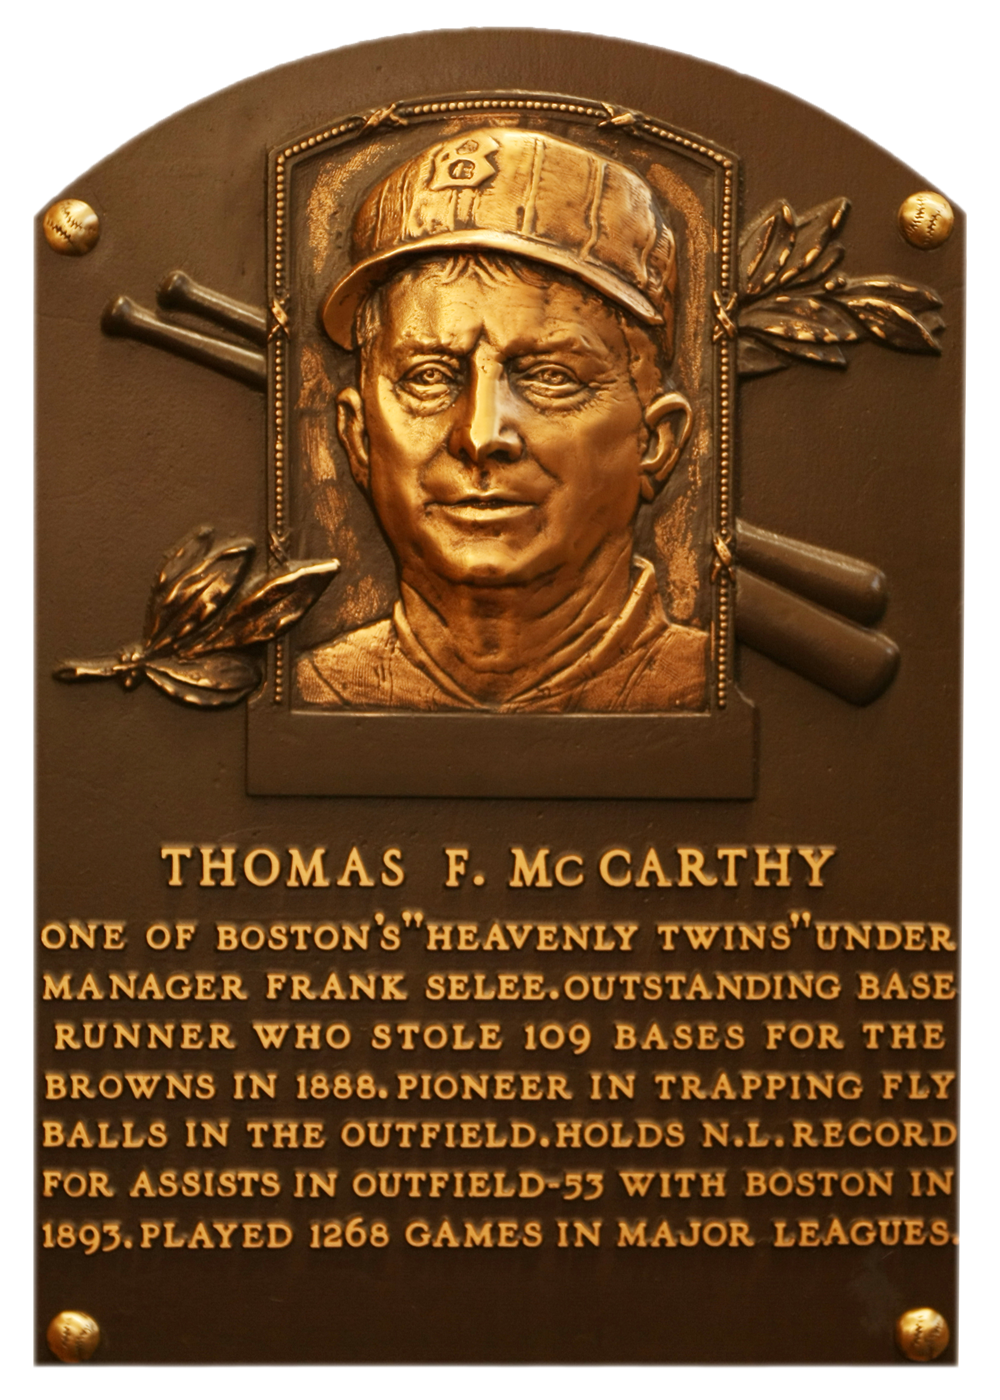 Tommy McCarthy Hall of Fame plaque